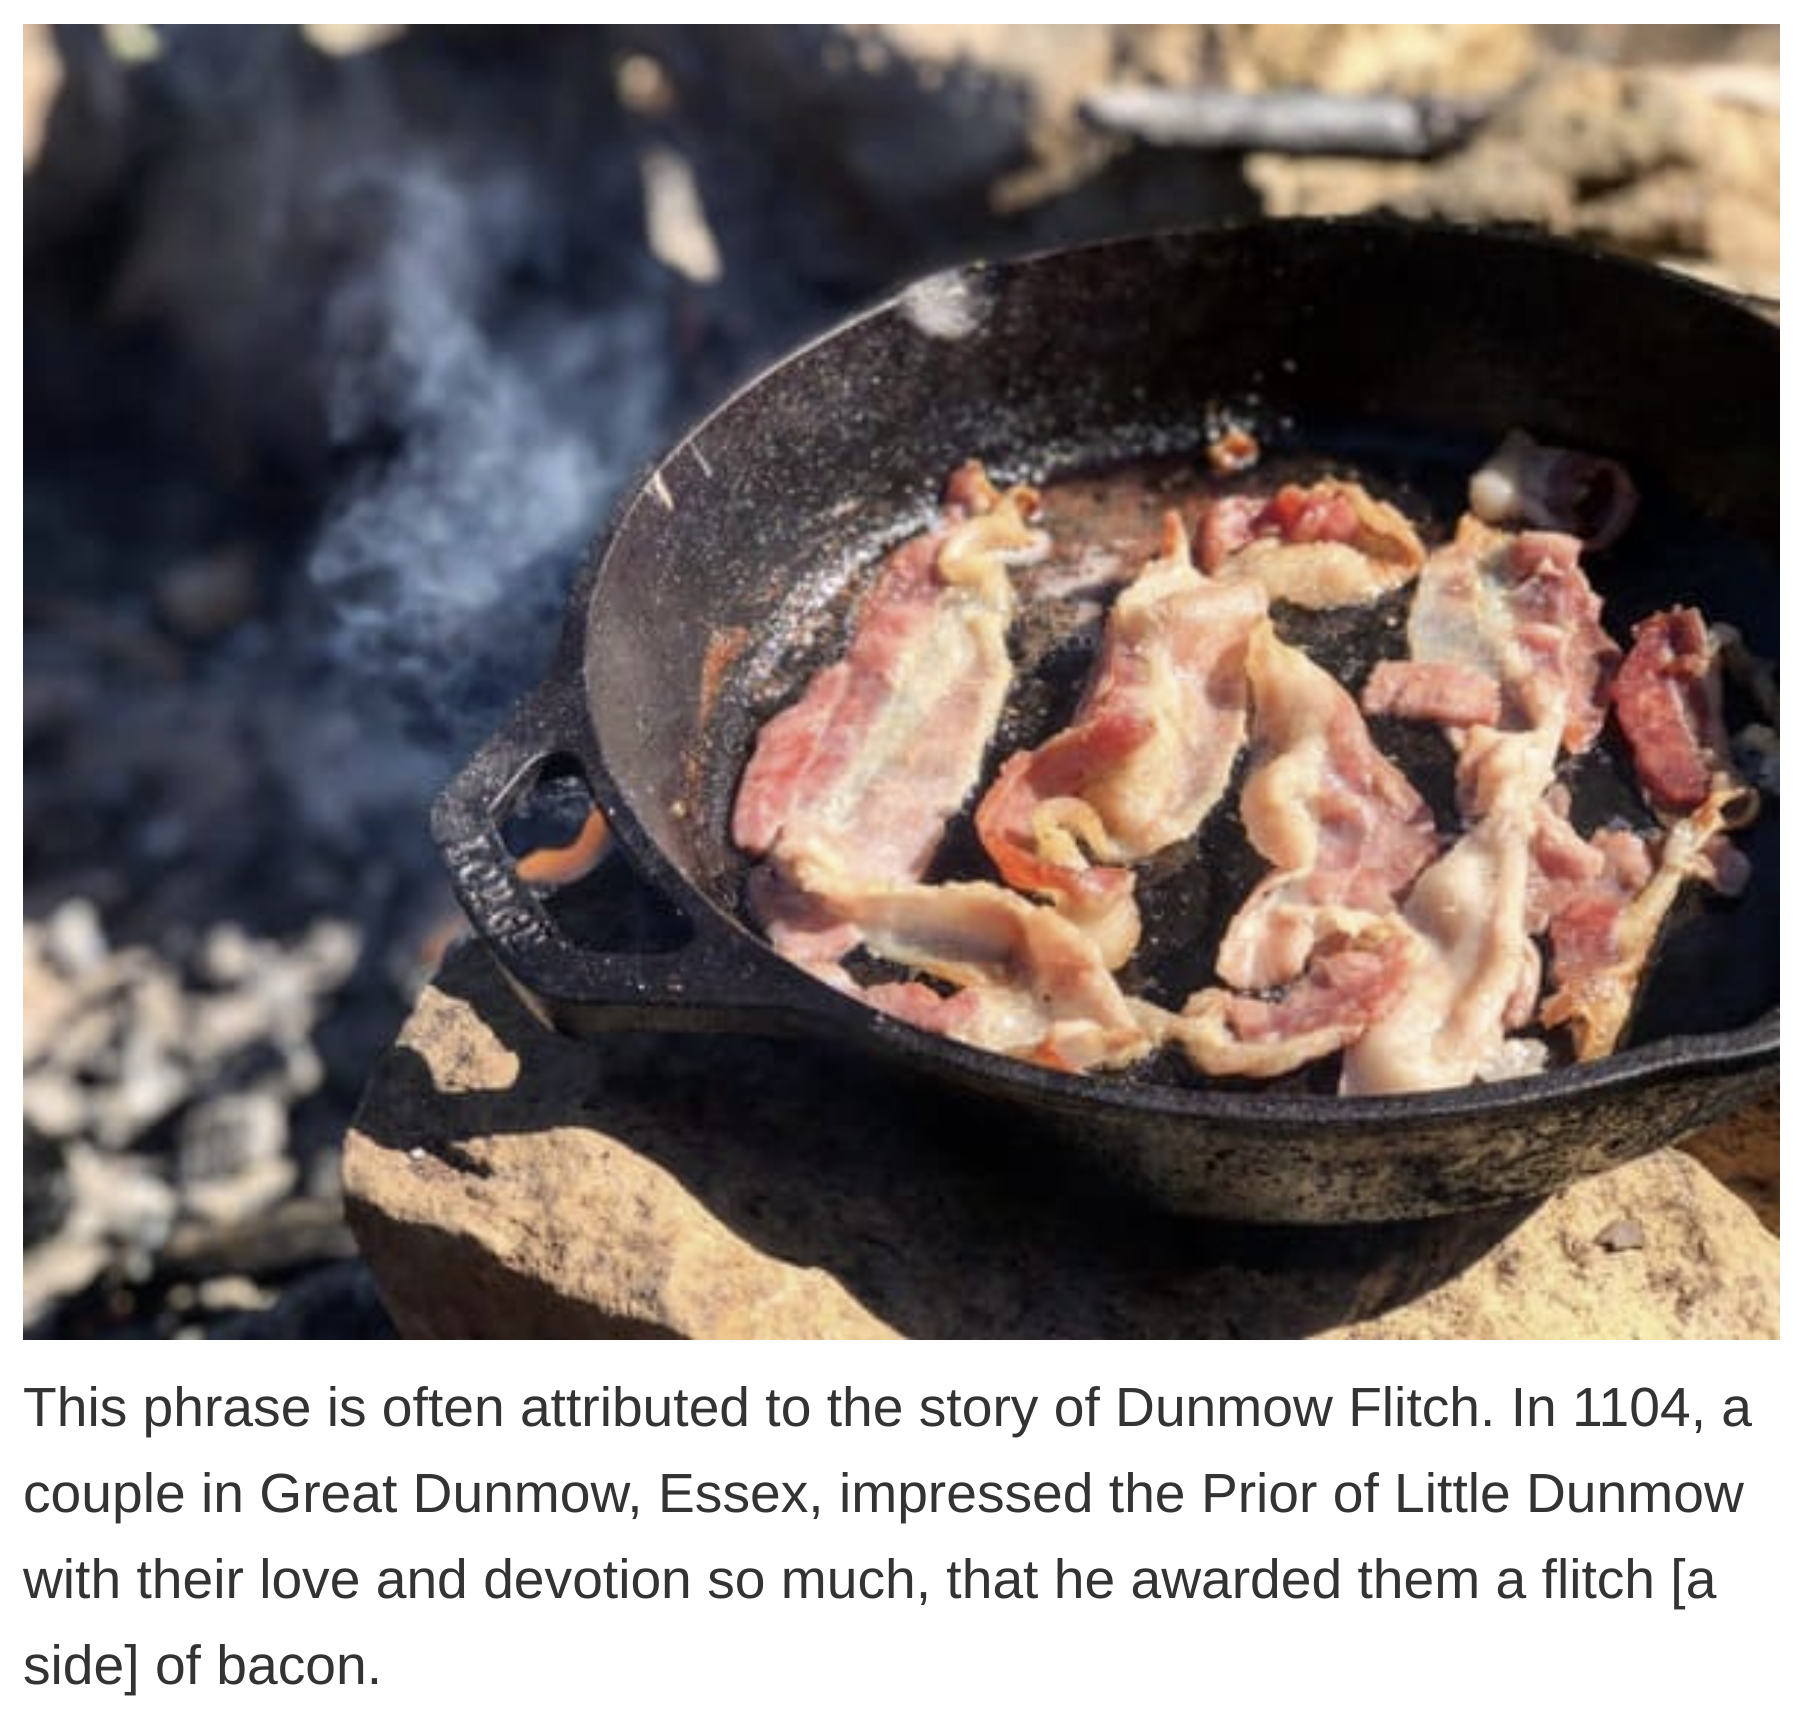 etymology english language - This phrase is often attributed to the story of Dunmow Flitch. In 1104, a couple in Great Dunmow, Essex, impressed the Prior of Little Dunmow with their love and devotion so much, that he awarded them a flitch a side of bacon.